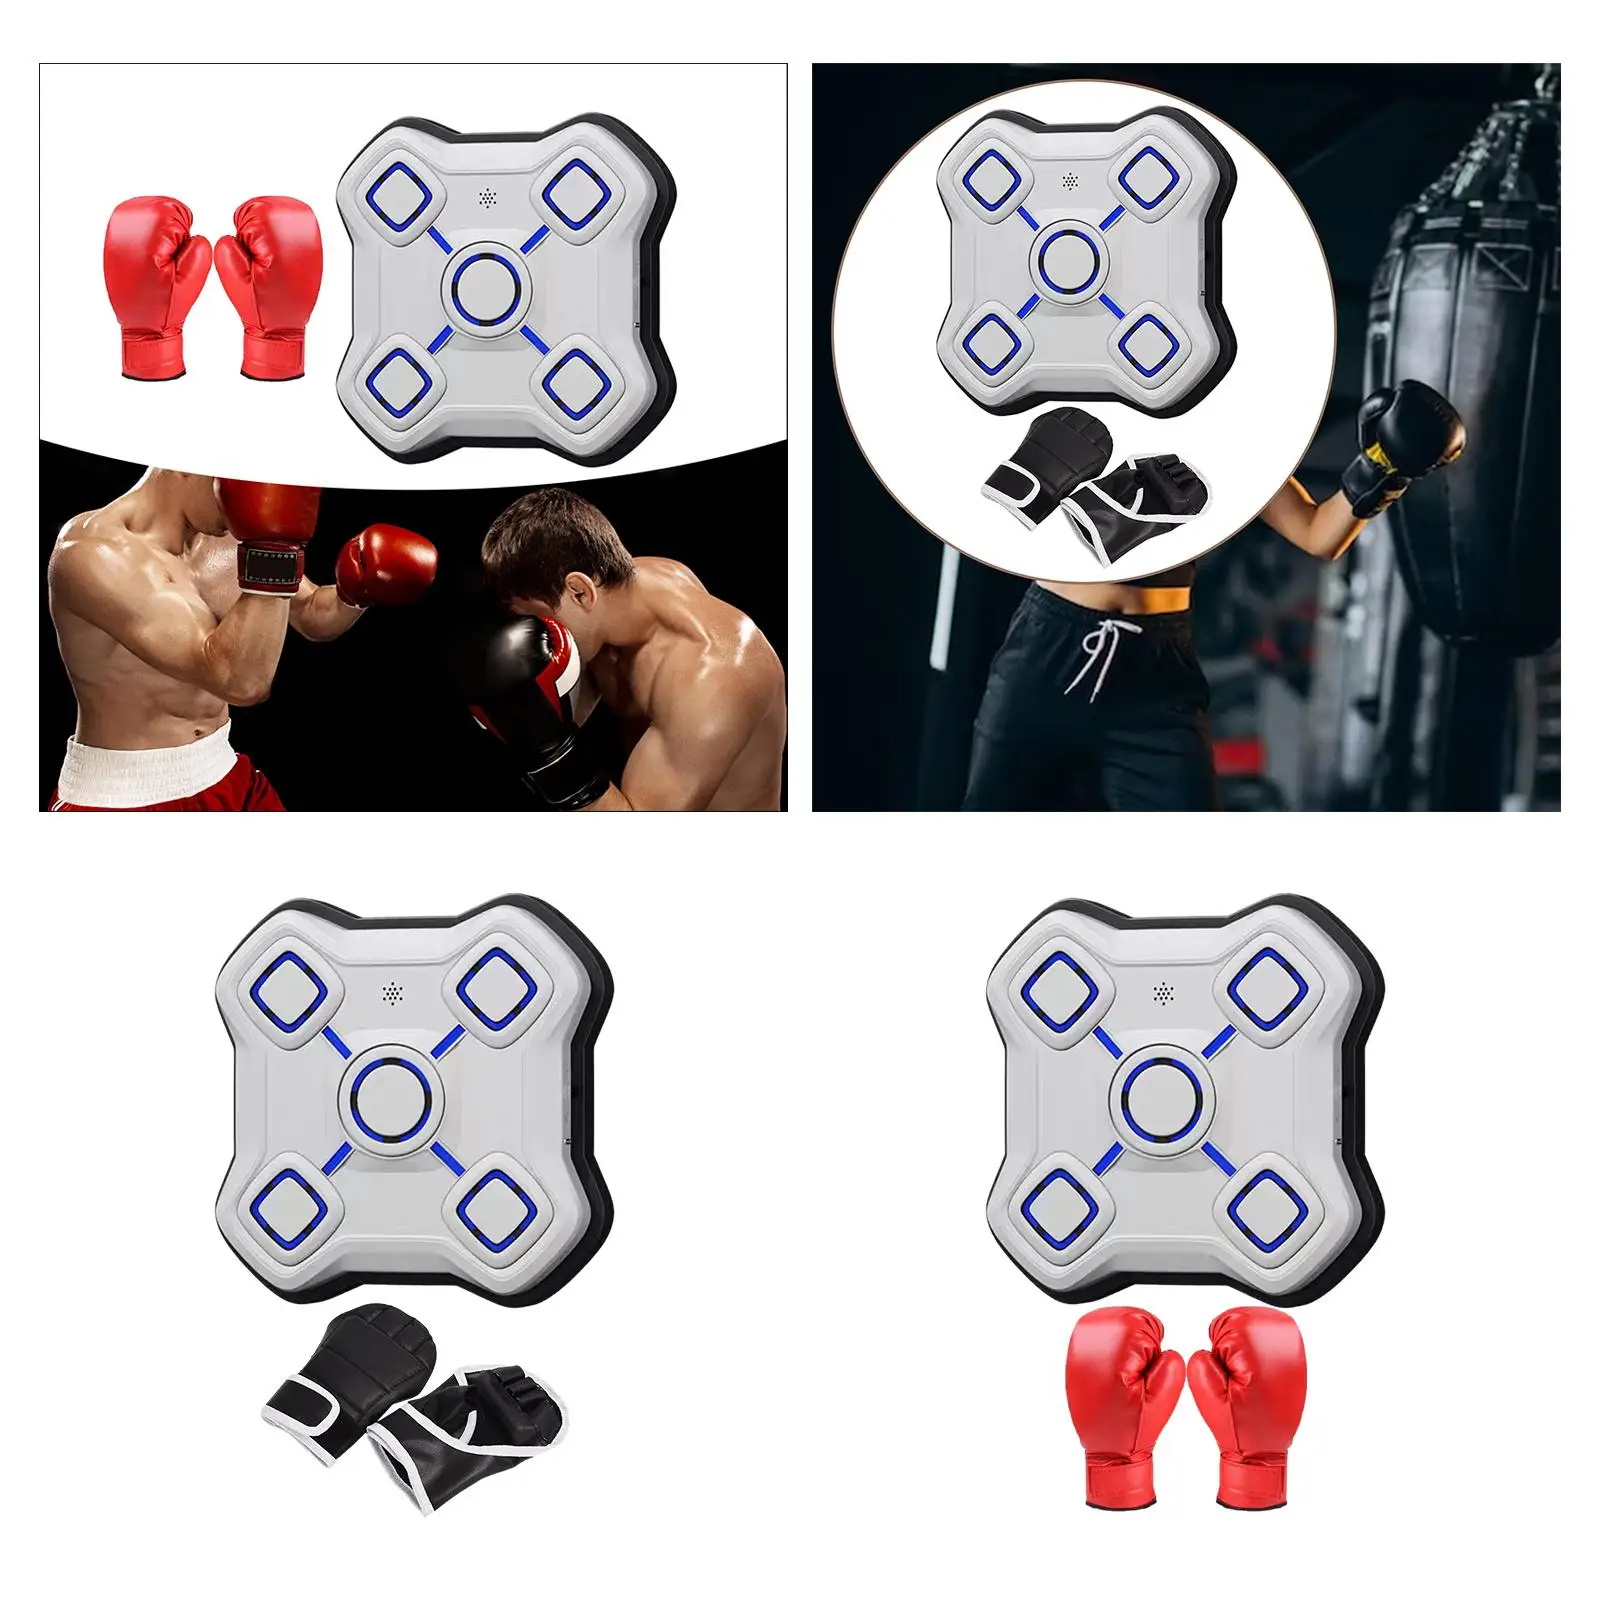 Electronic Boxing Machine Boxing Trainer for Strength Training Indoor Focus